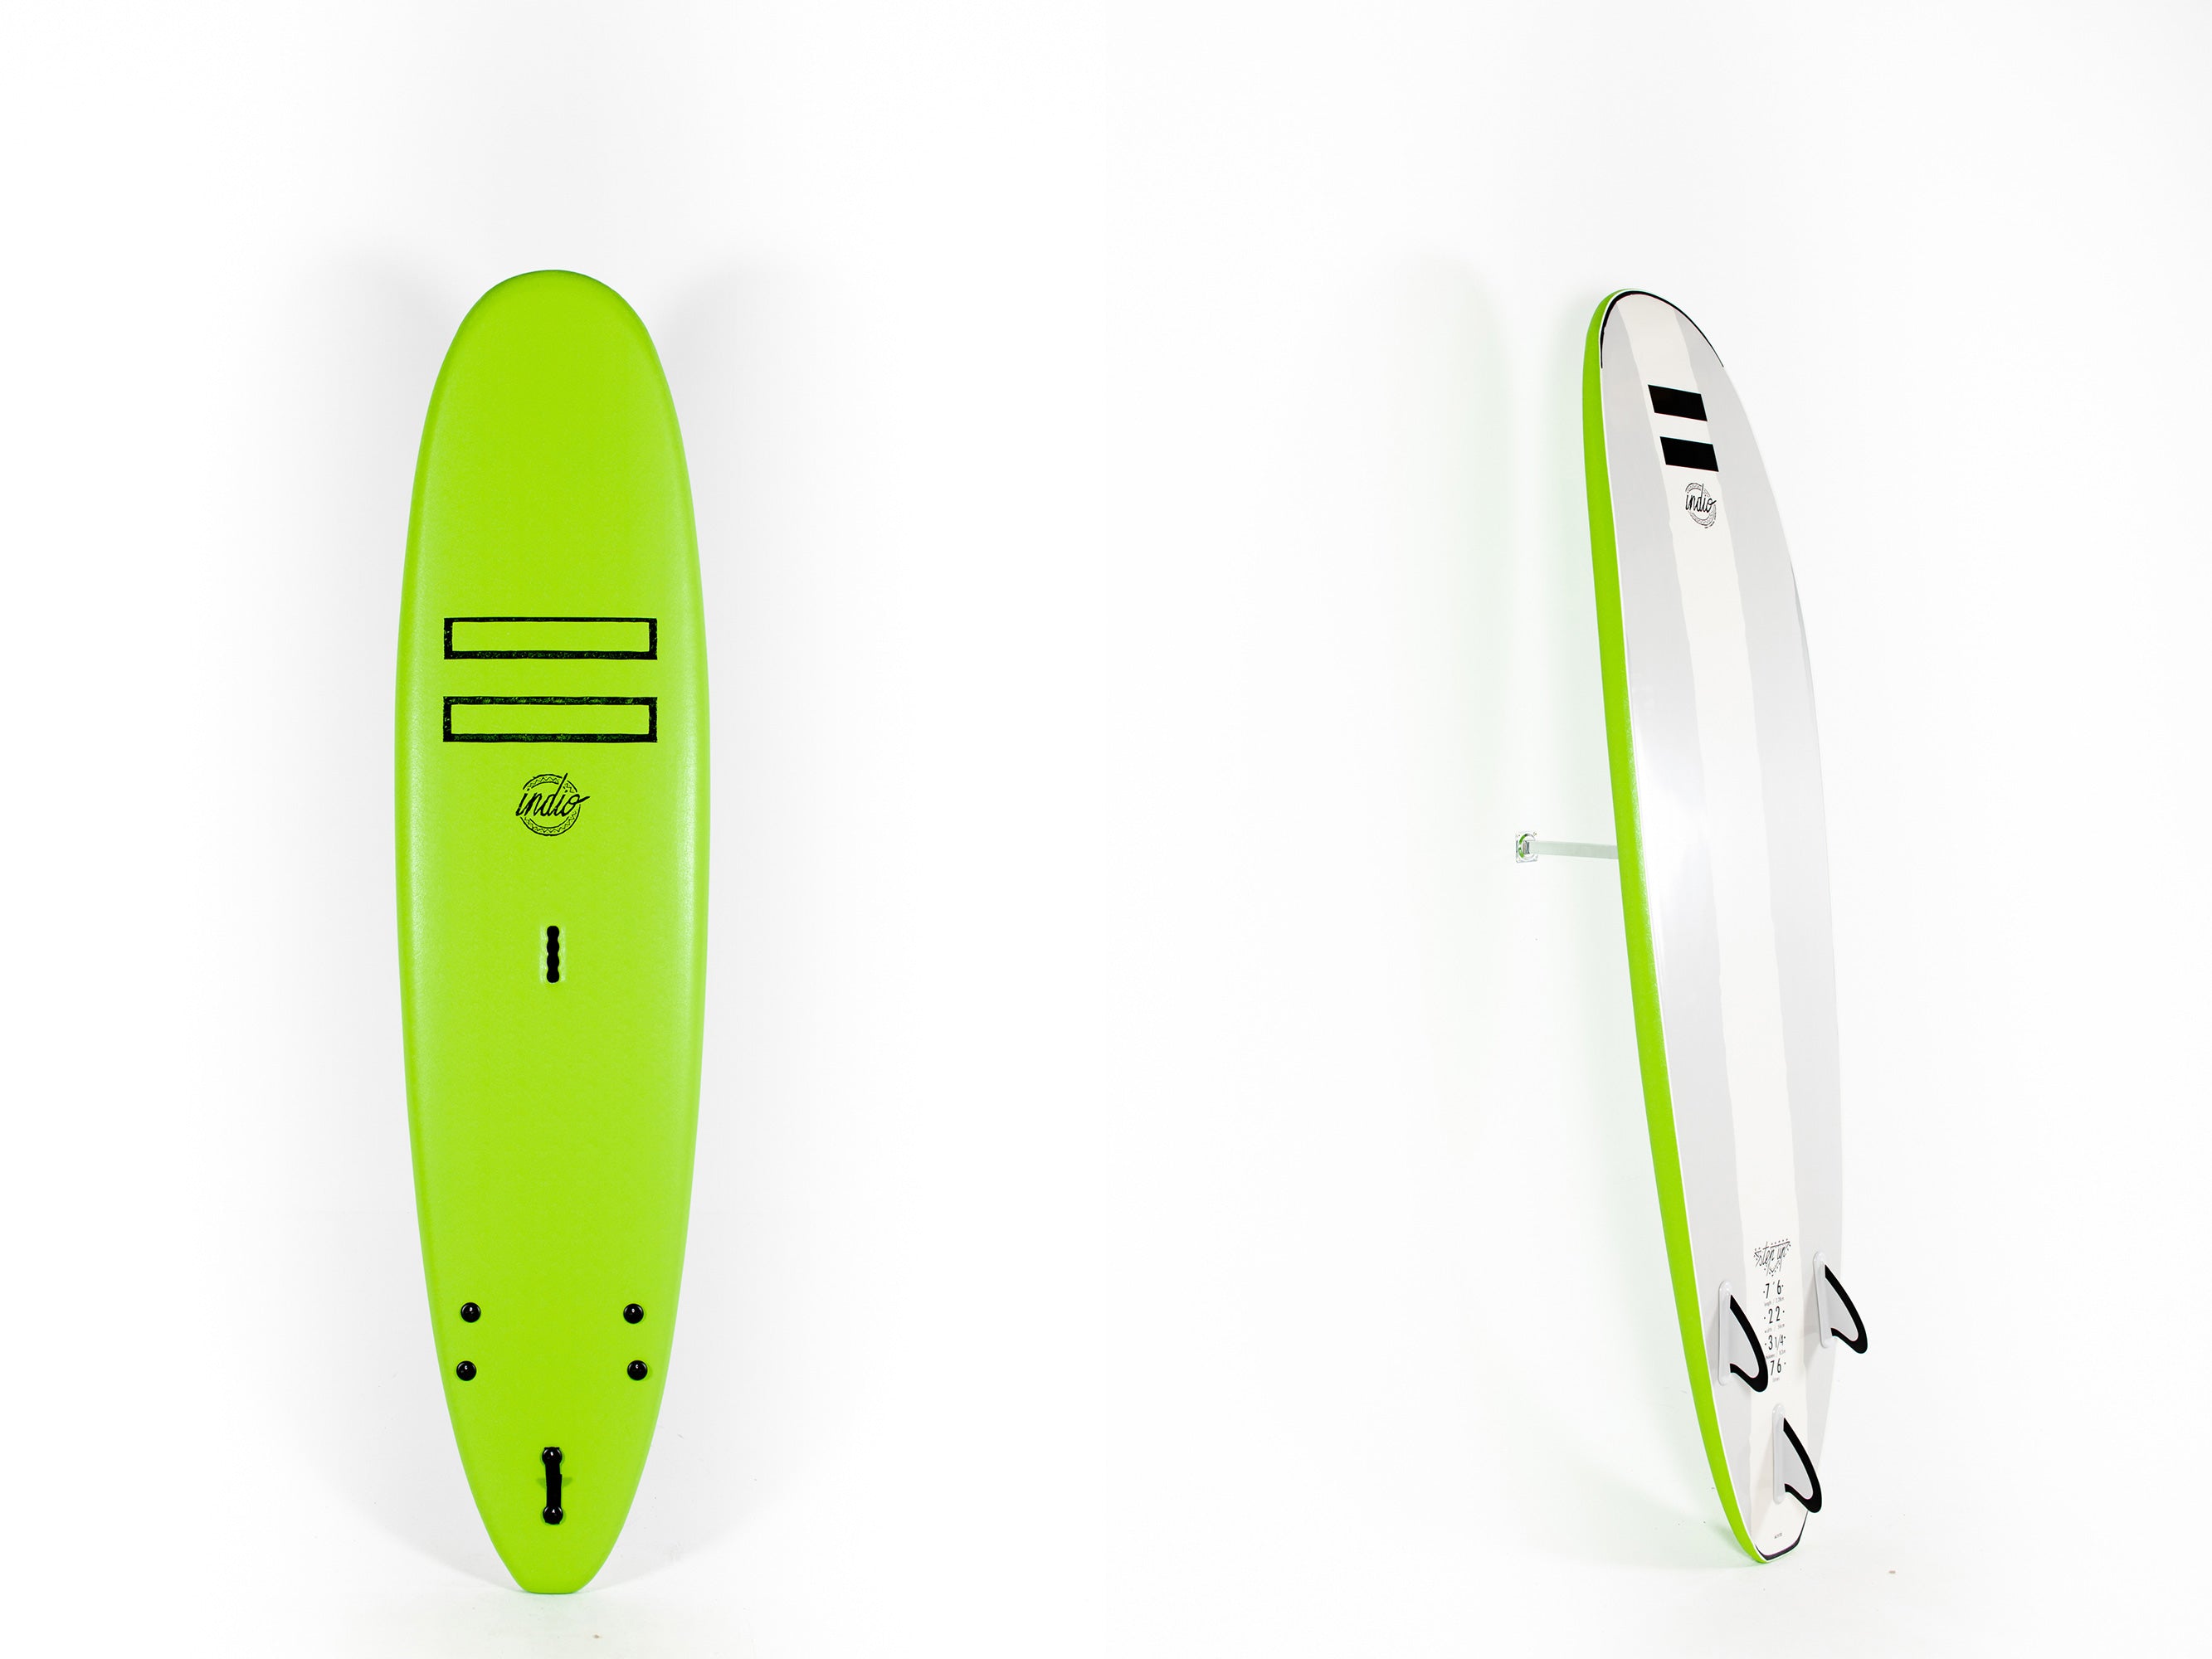 Pukas Surf Shop Indio Surfboards Step up